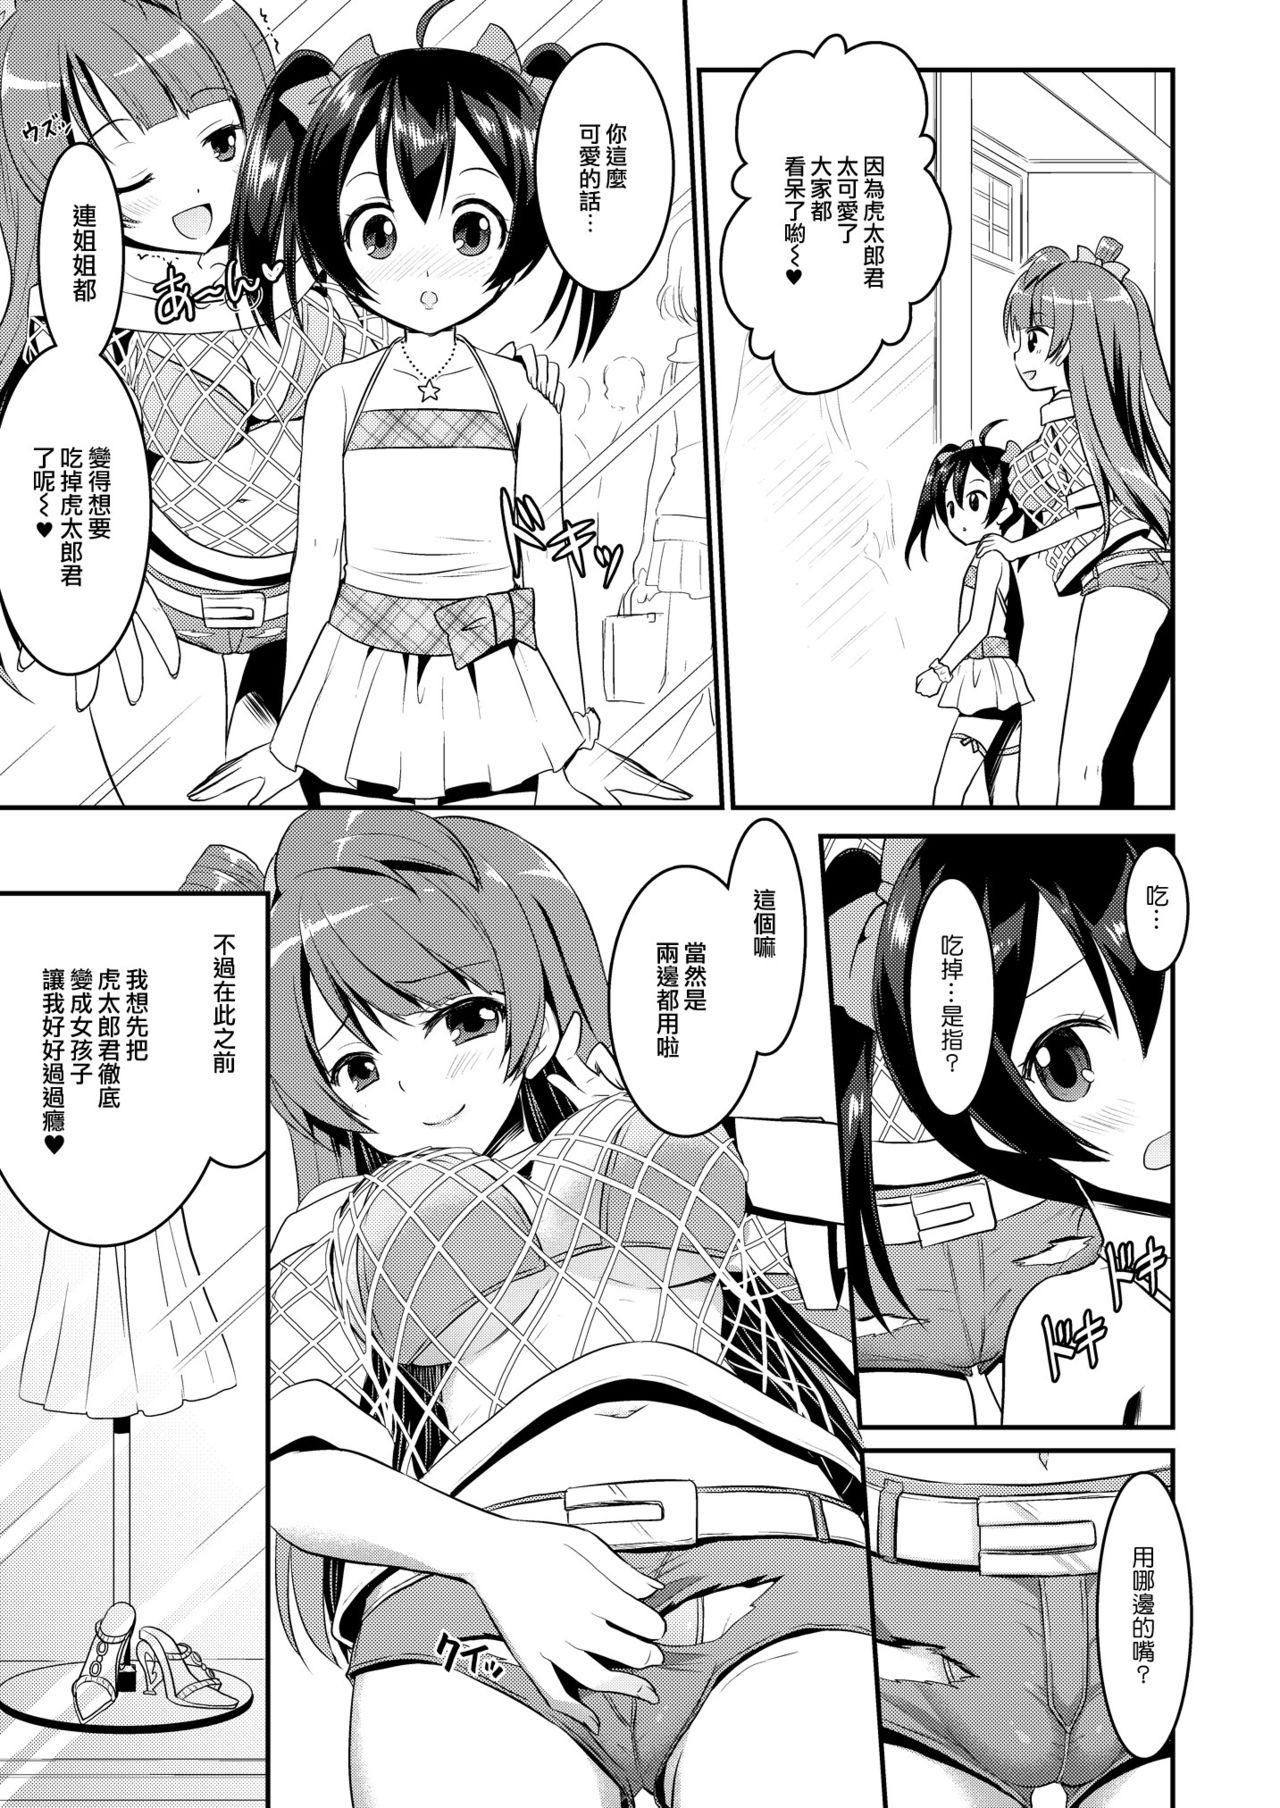 Puto Eat Meat Girl 4 - Love live Gay Blowjob - Page 9